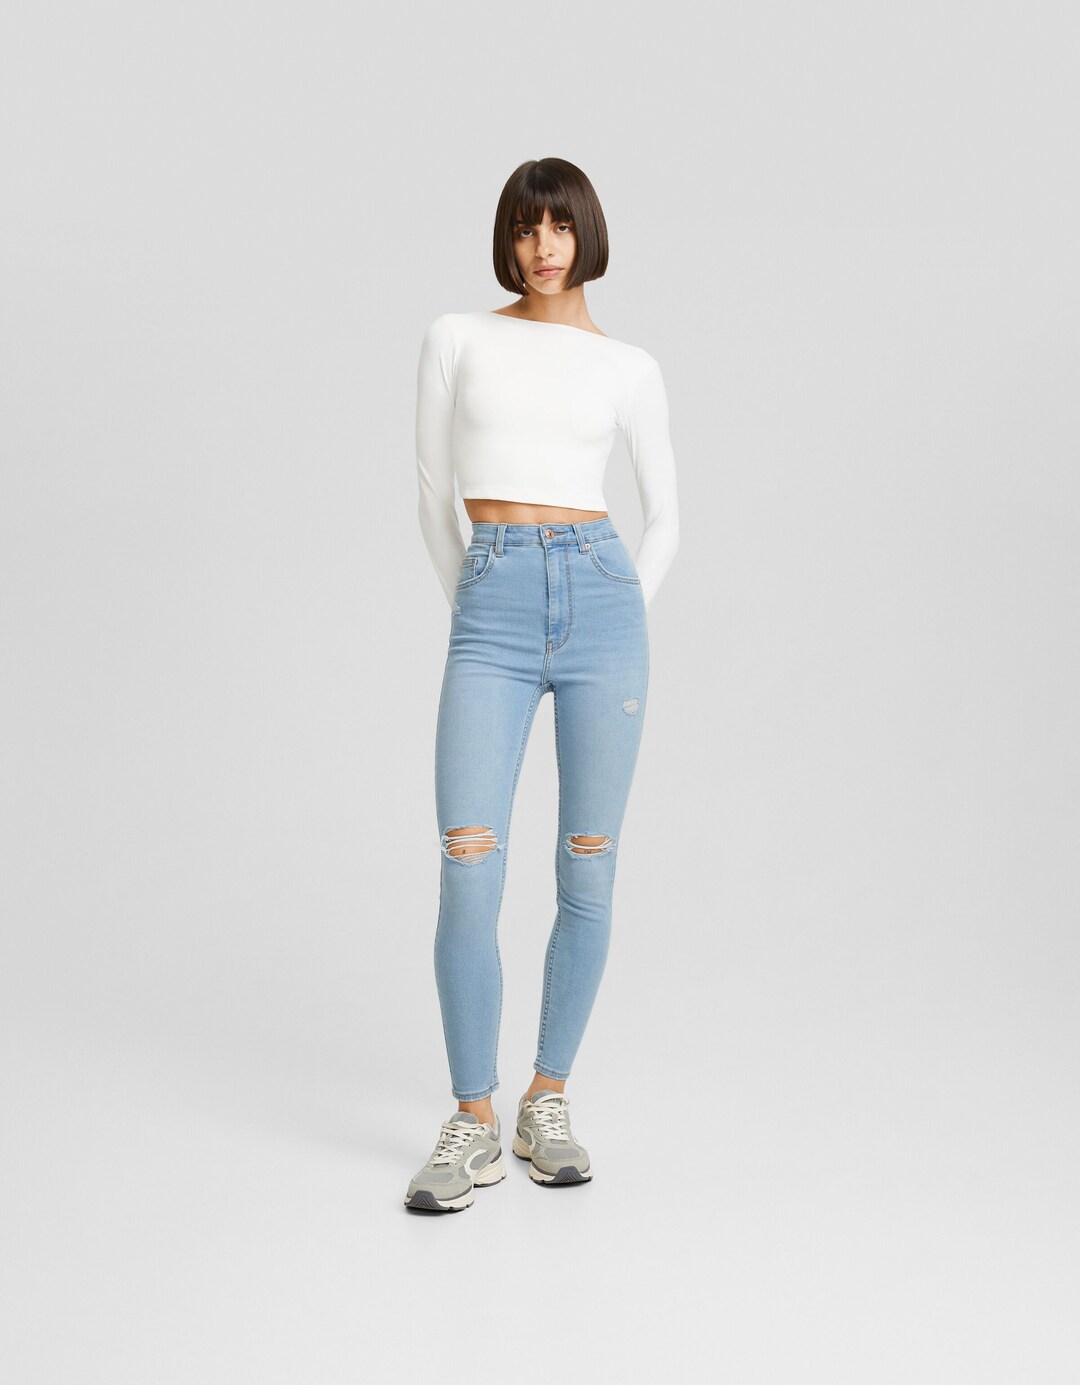 Ripped super high-waist skinny jeans